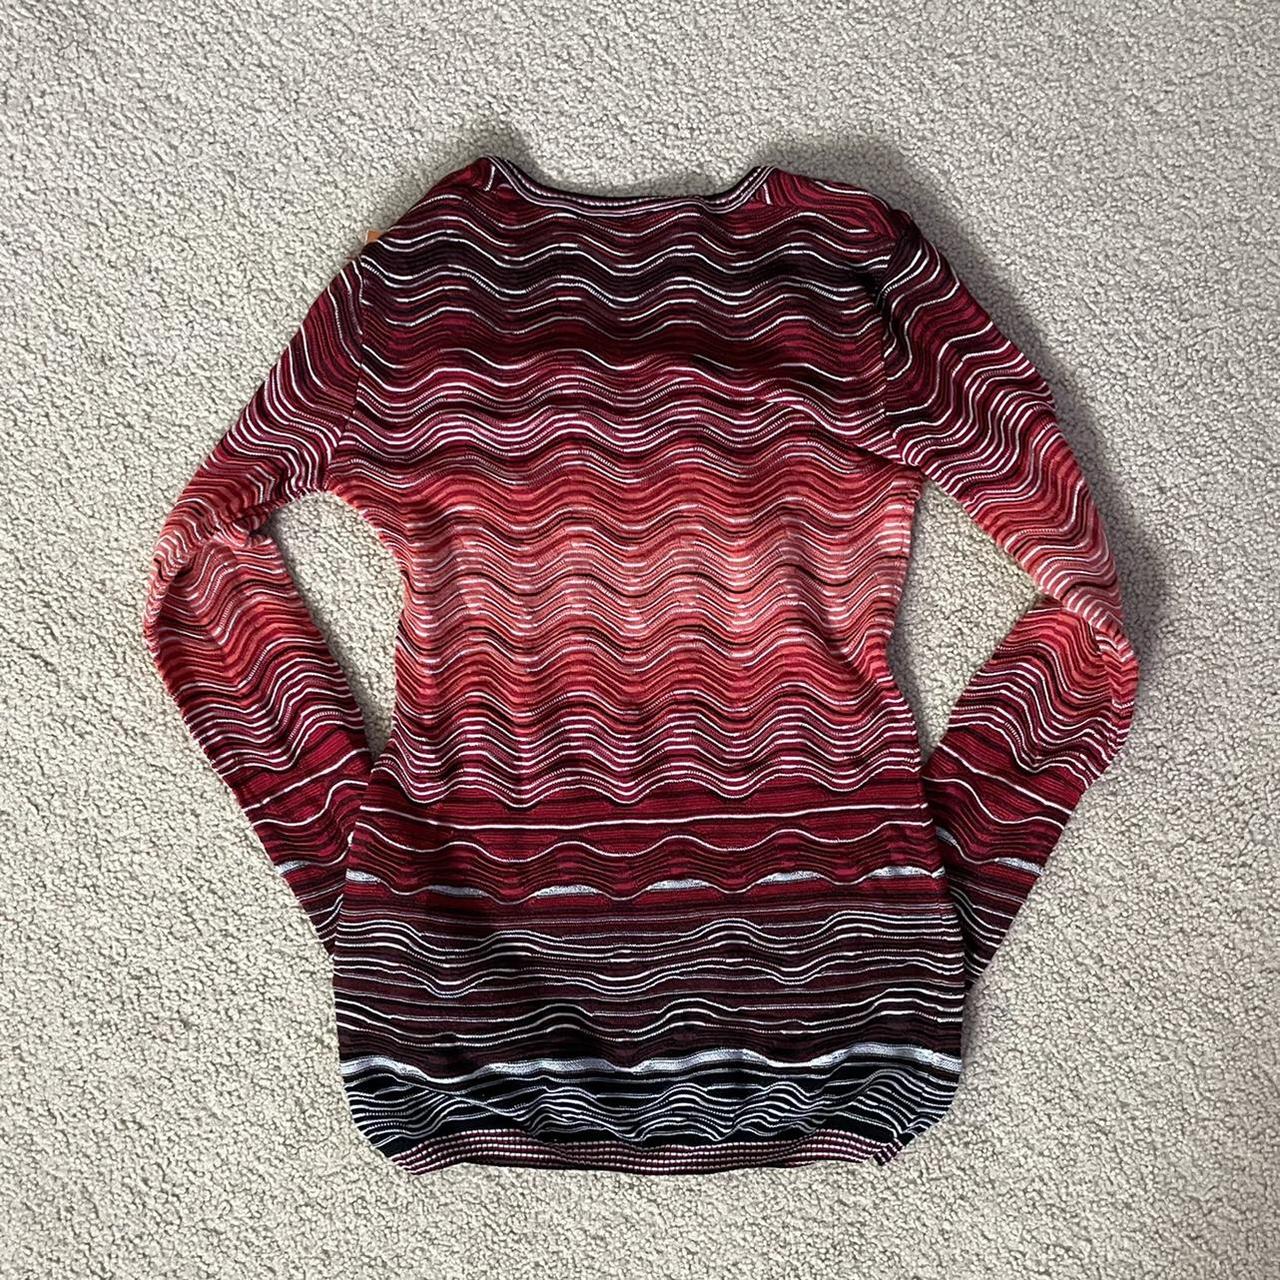 Missoni Women's Burgundy and Brown Top (3)